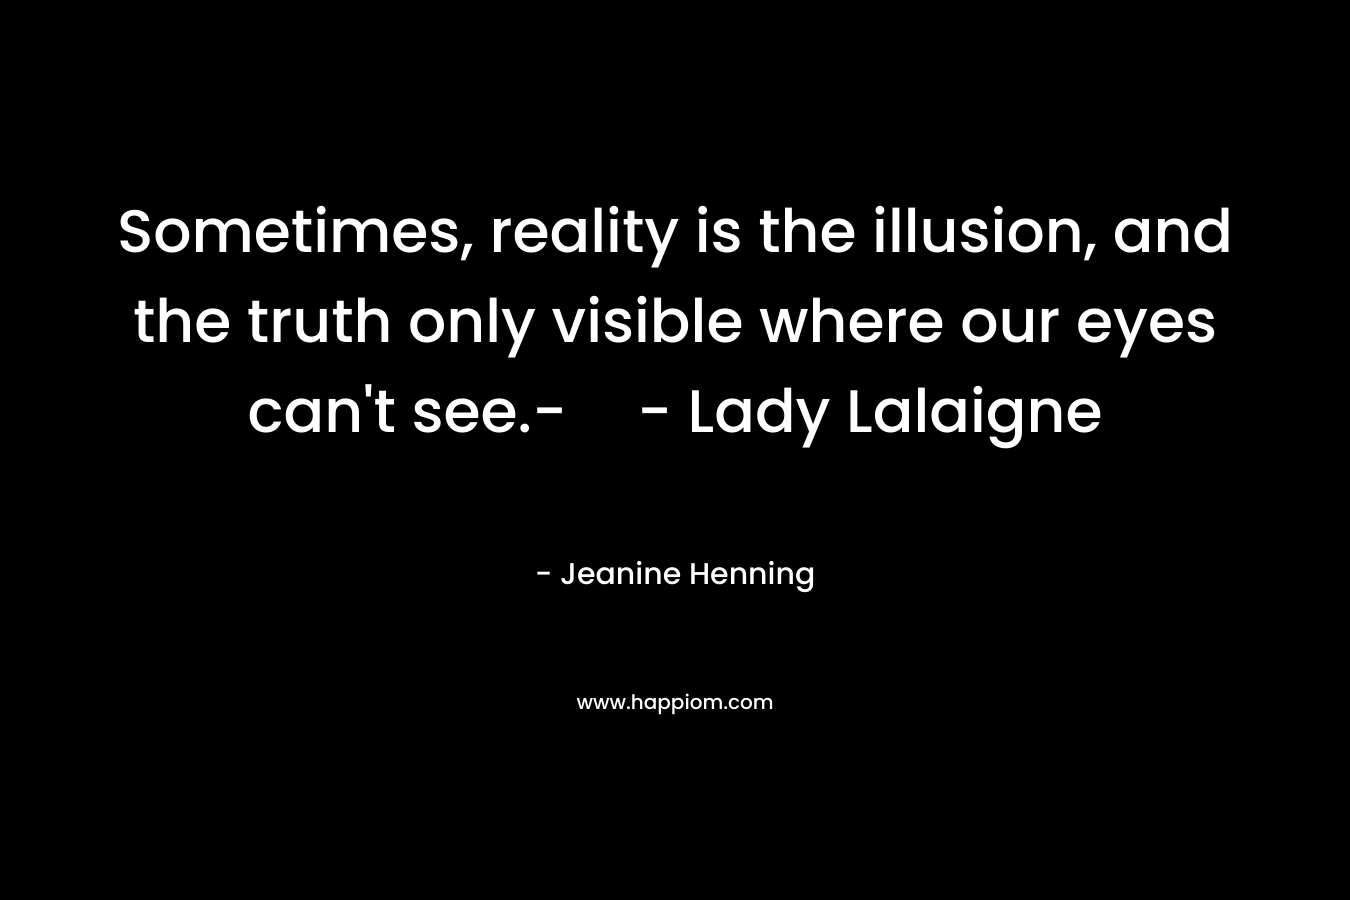 Sometimes, reality is the illusion, and the truth only visible where our eyes can't see.-- Lady Lalaigne